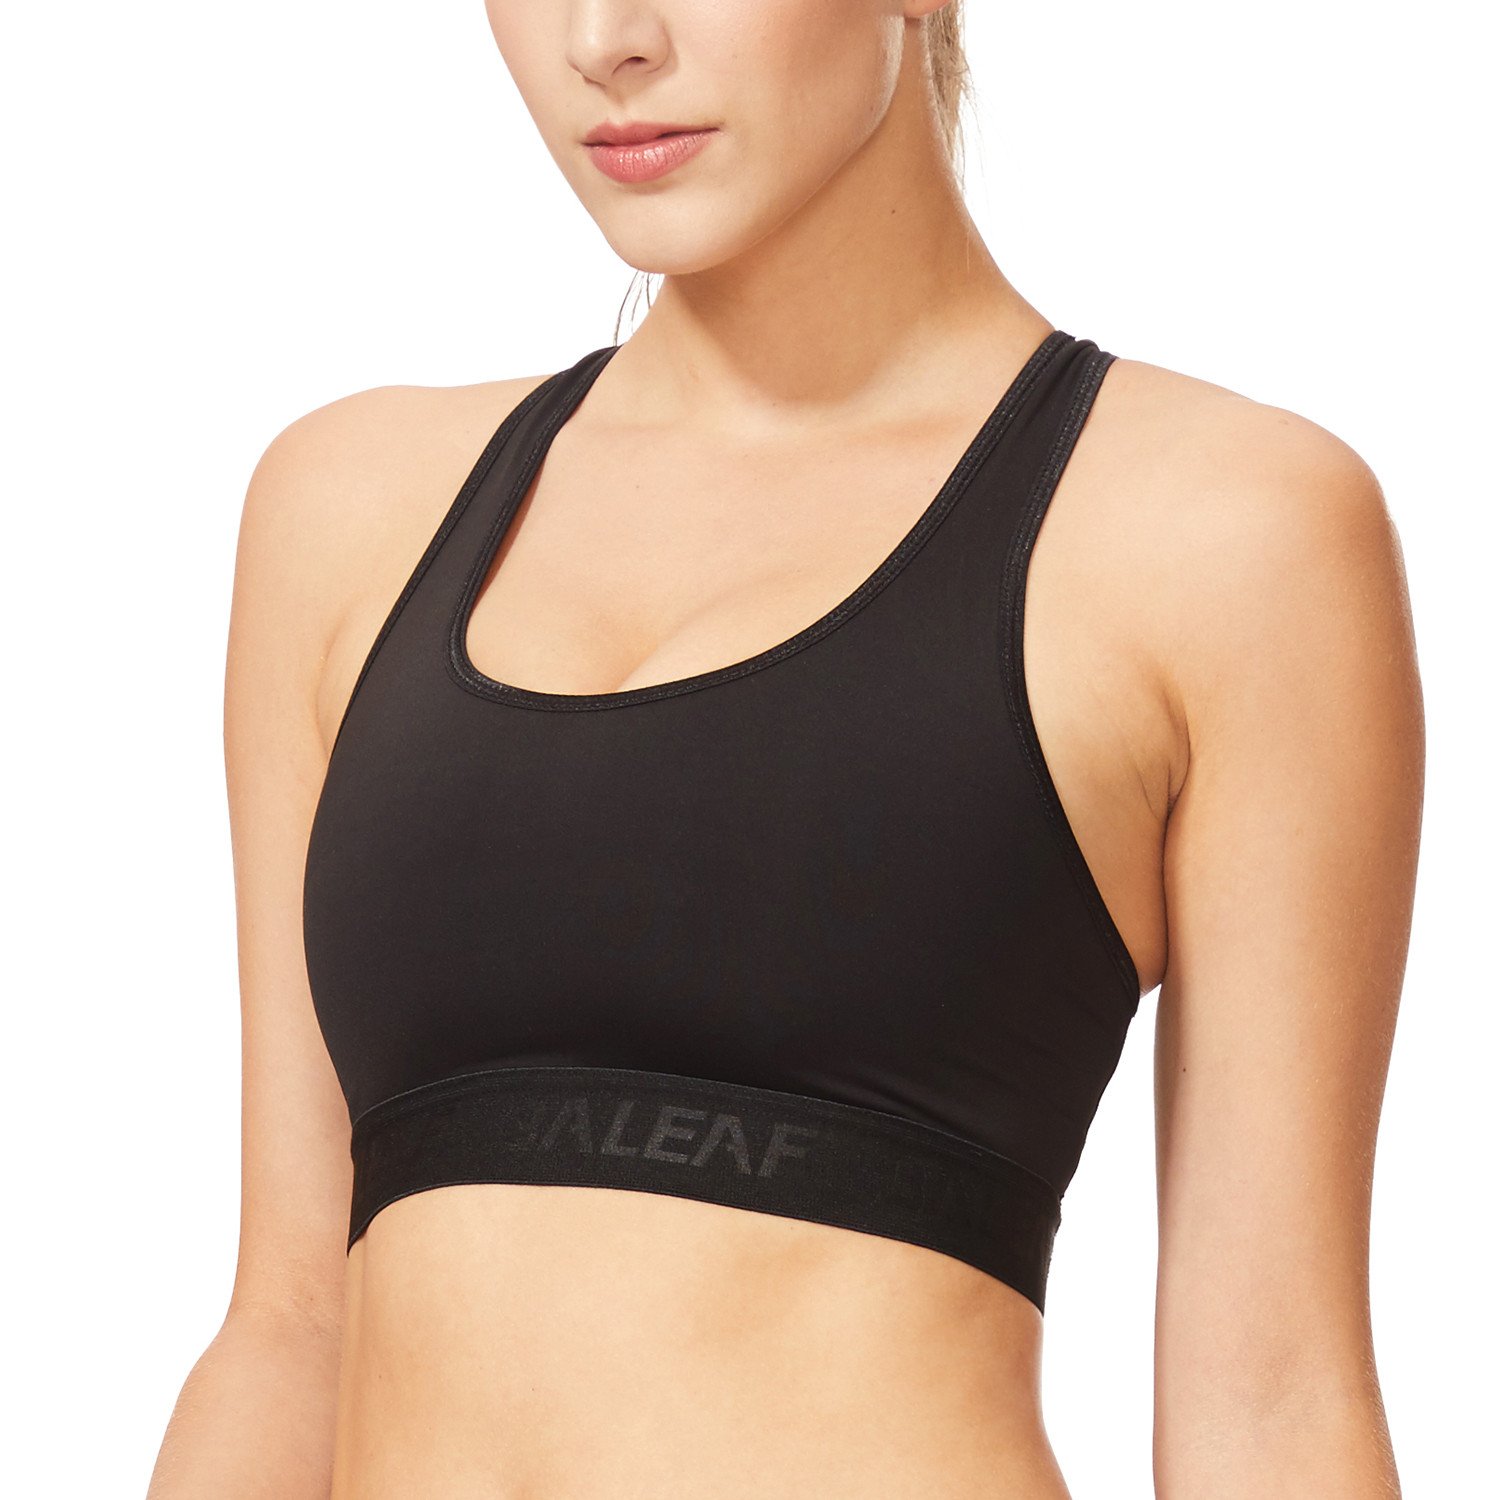 Sports Bra Styles: The Variety of Designs You Can Choose From